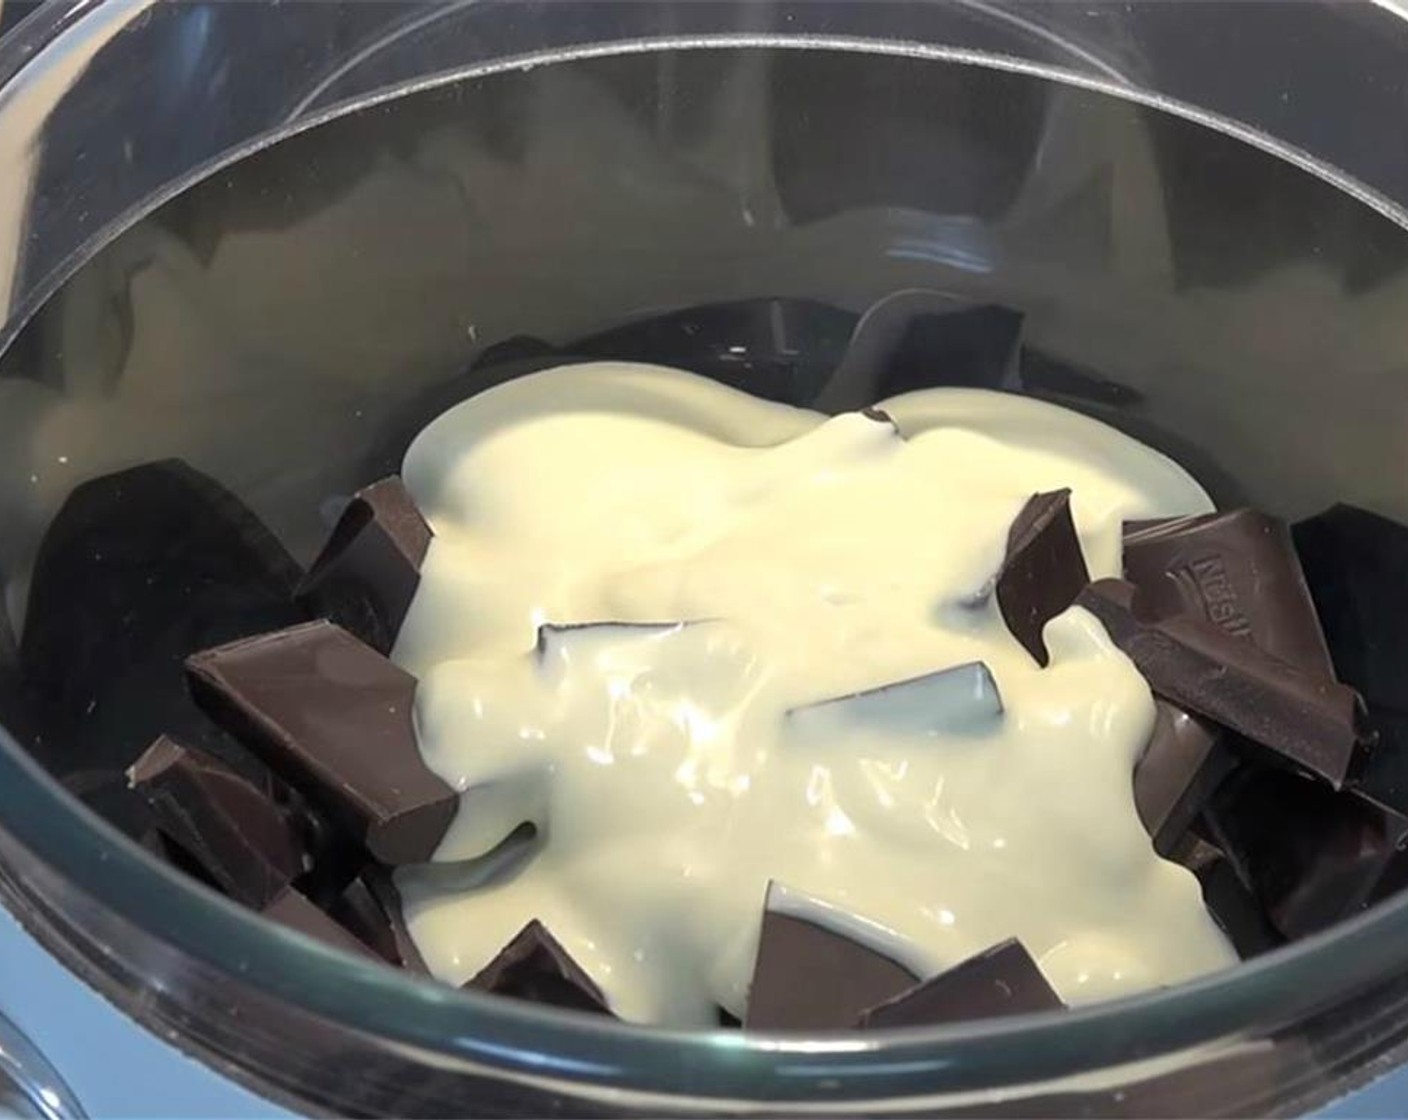 step 1 In a heat-safe bowl over simmering hot water, melt and combine Semi-Sweet Dark Chocolate (2 1/4 cups) and Whipping Cream (2/3 cup) to make the ganache.